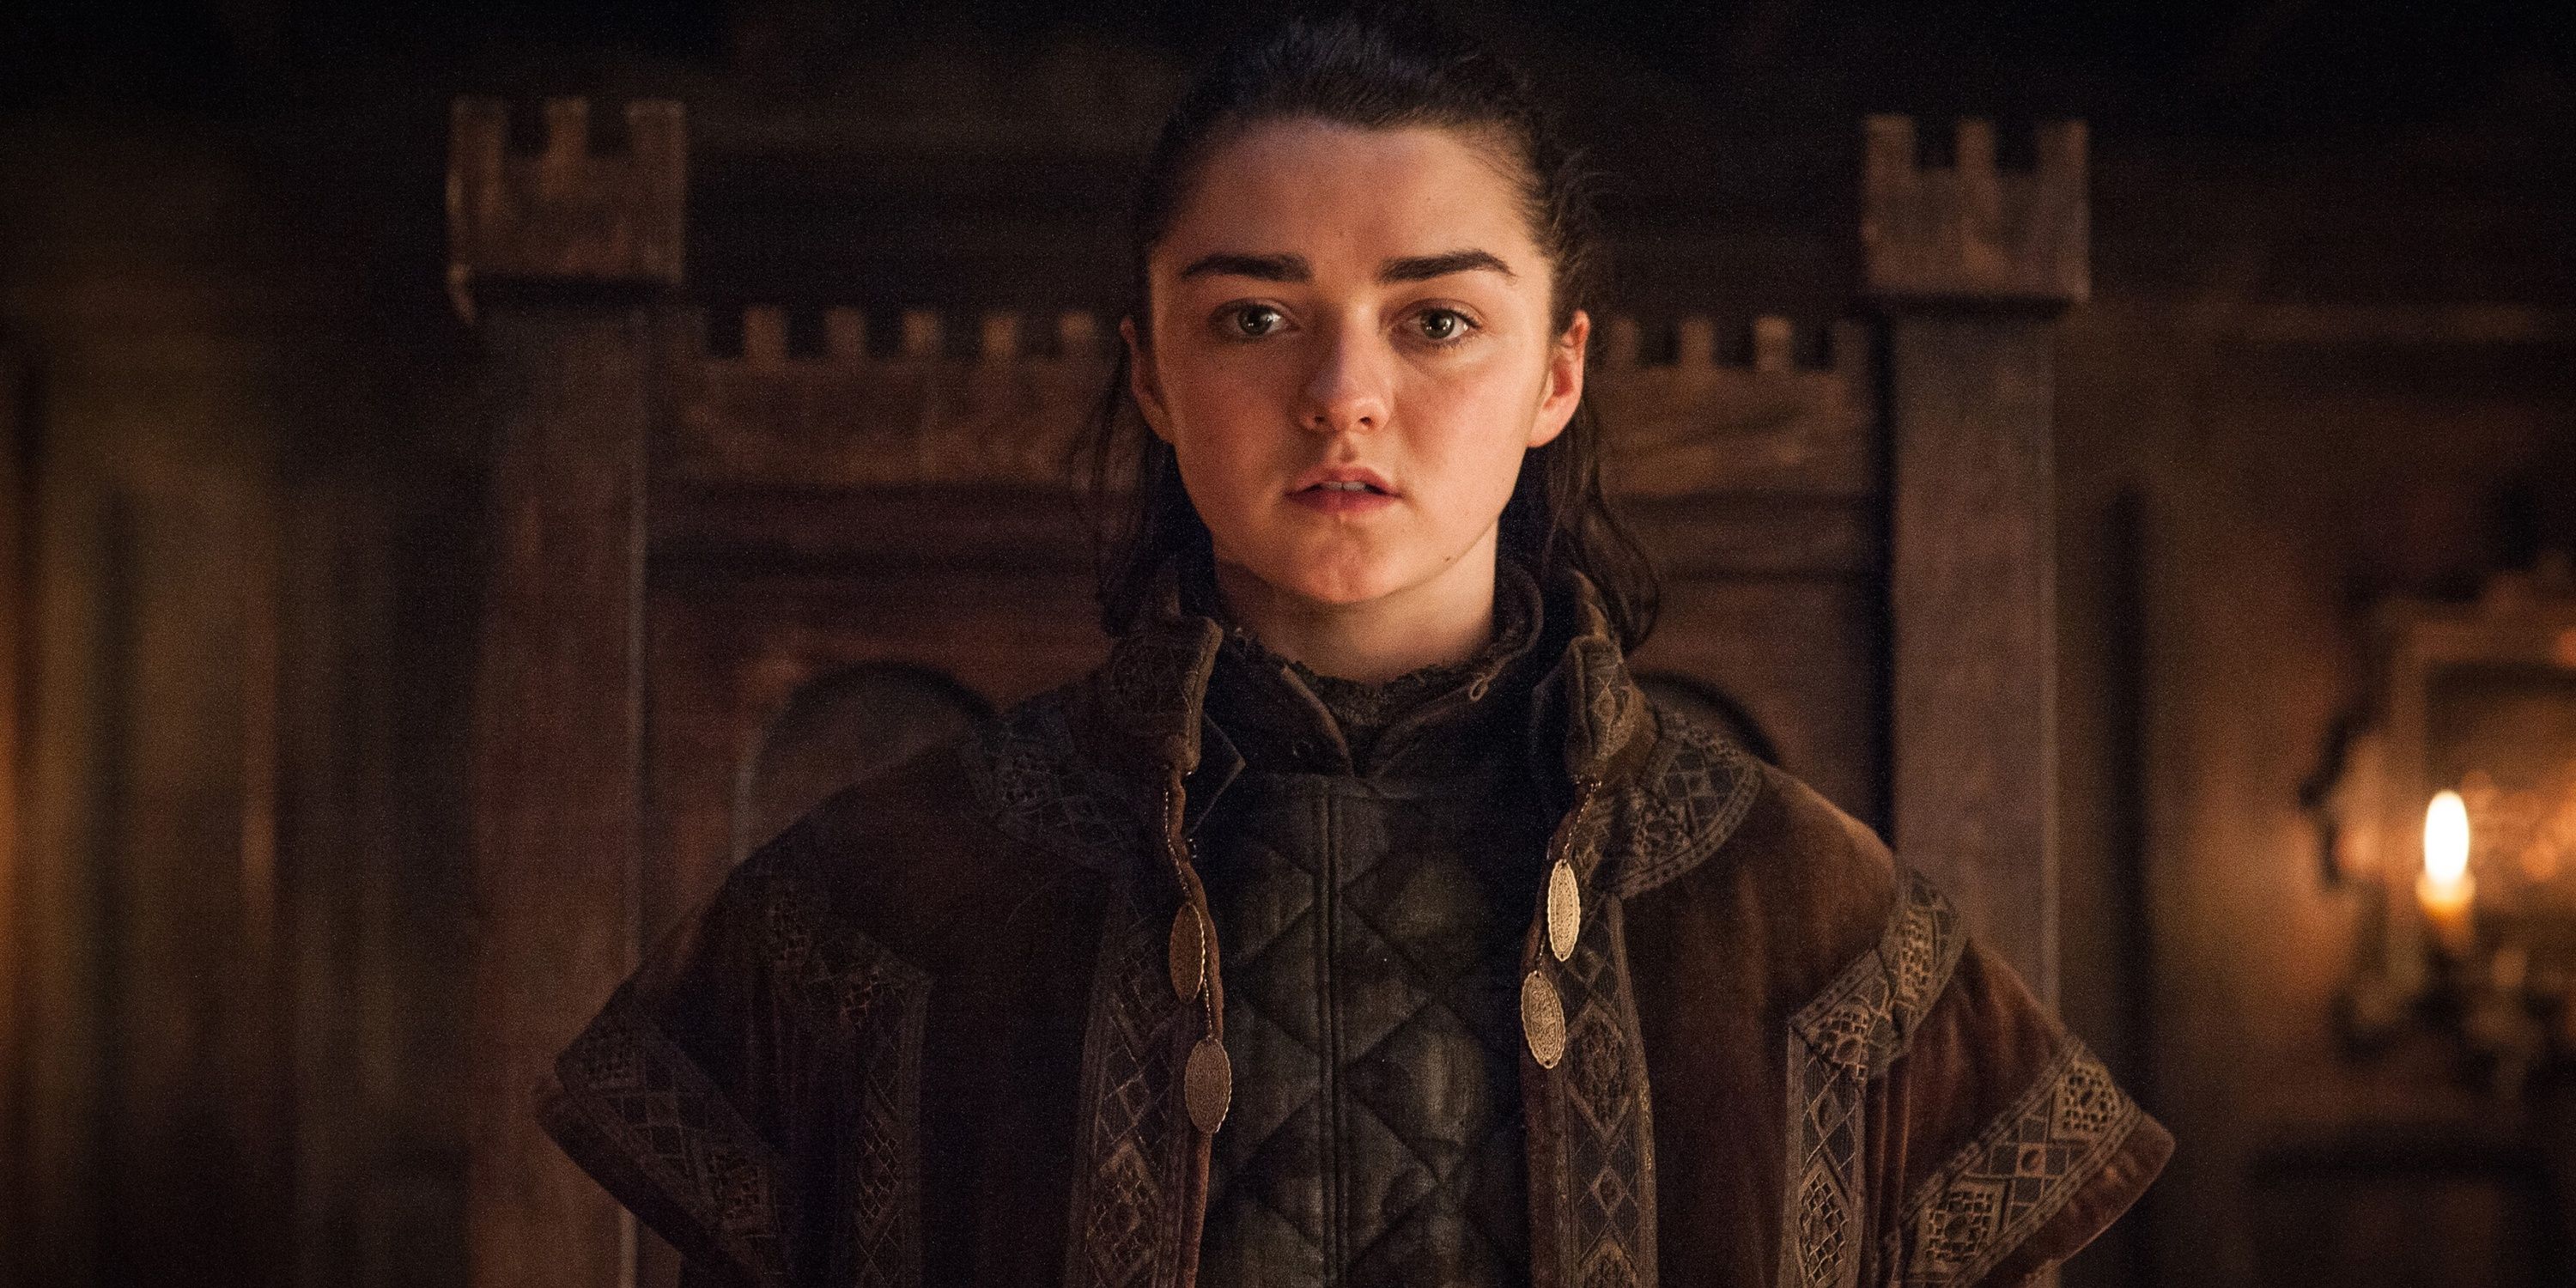 Maisie Williams as Arya Stark wearing Walder Frey's clothes in Game of Thrones